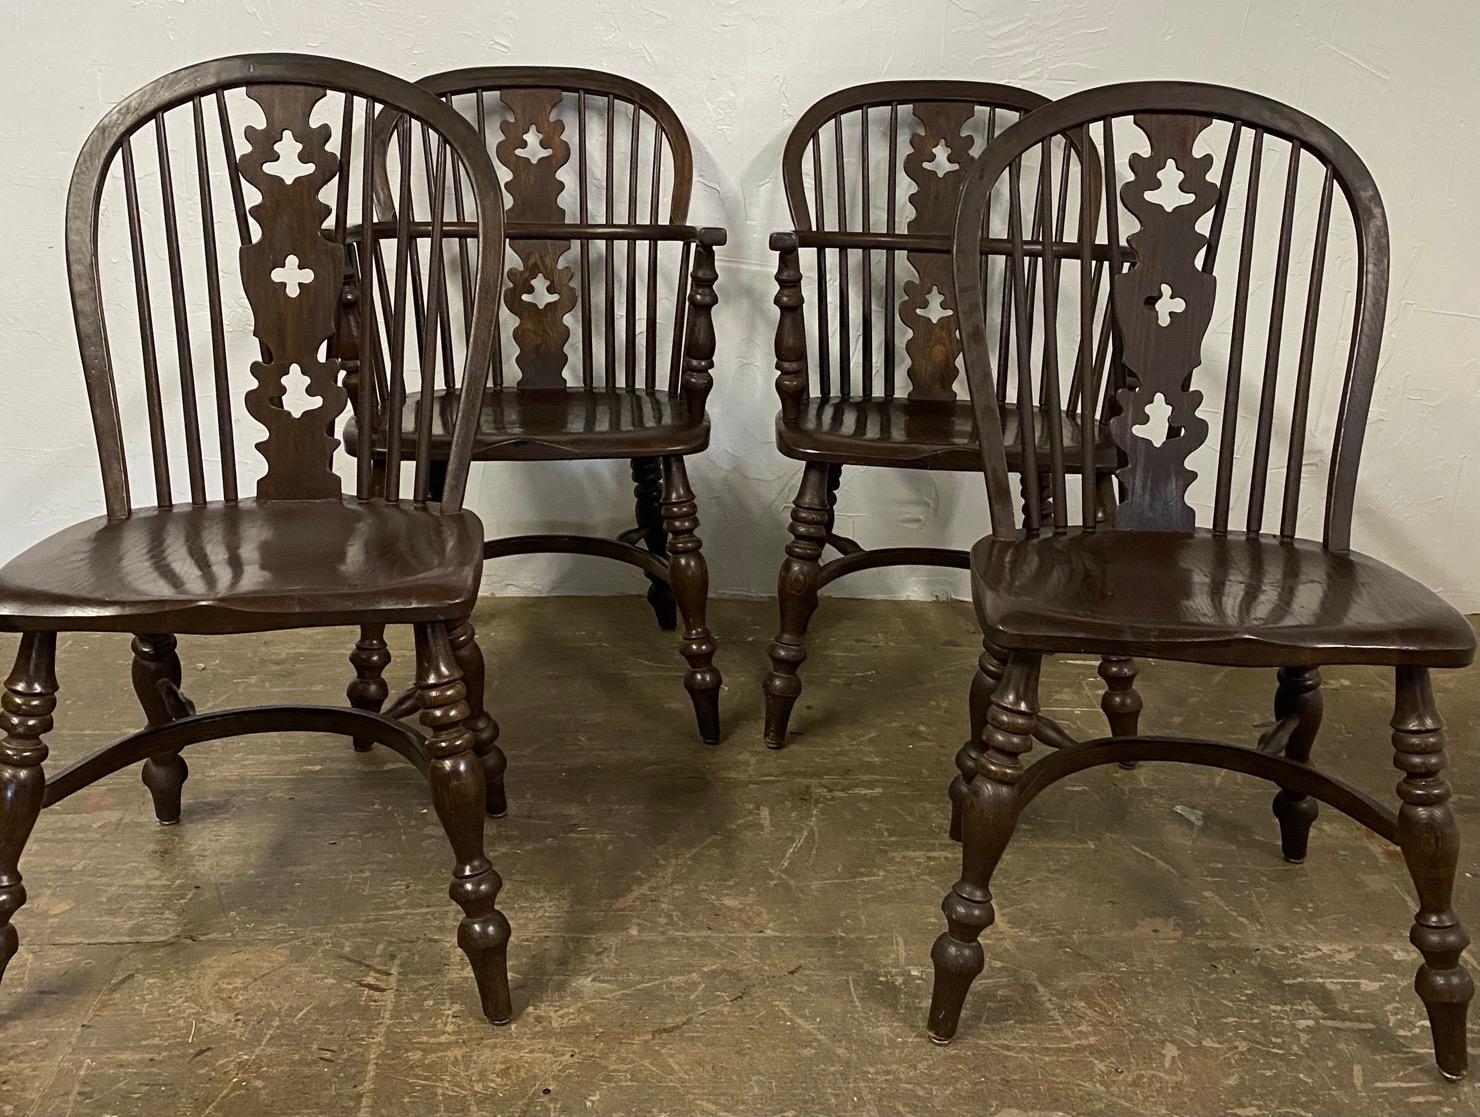 Four English Windsor bow-brace spindle back dining chairs with decorative splat and finely turned legs and stretcher consisting of 2 host and hostess chairs and 2 side chairs. All four chairs are structurally very sound with one chair seat showing